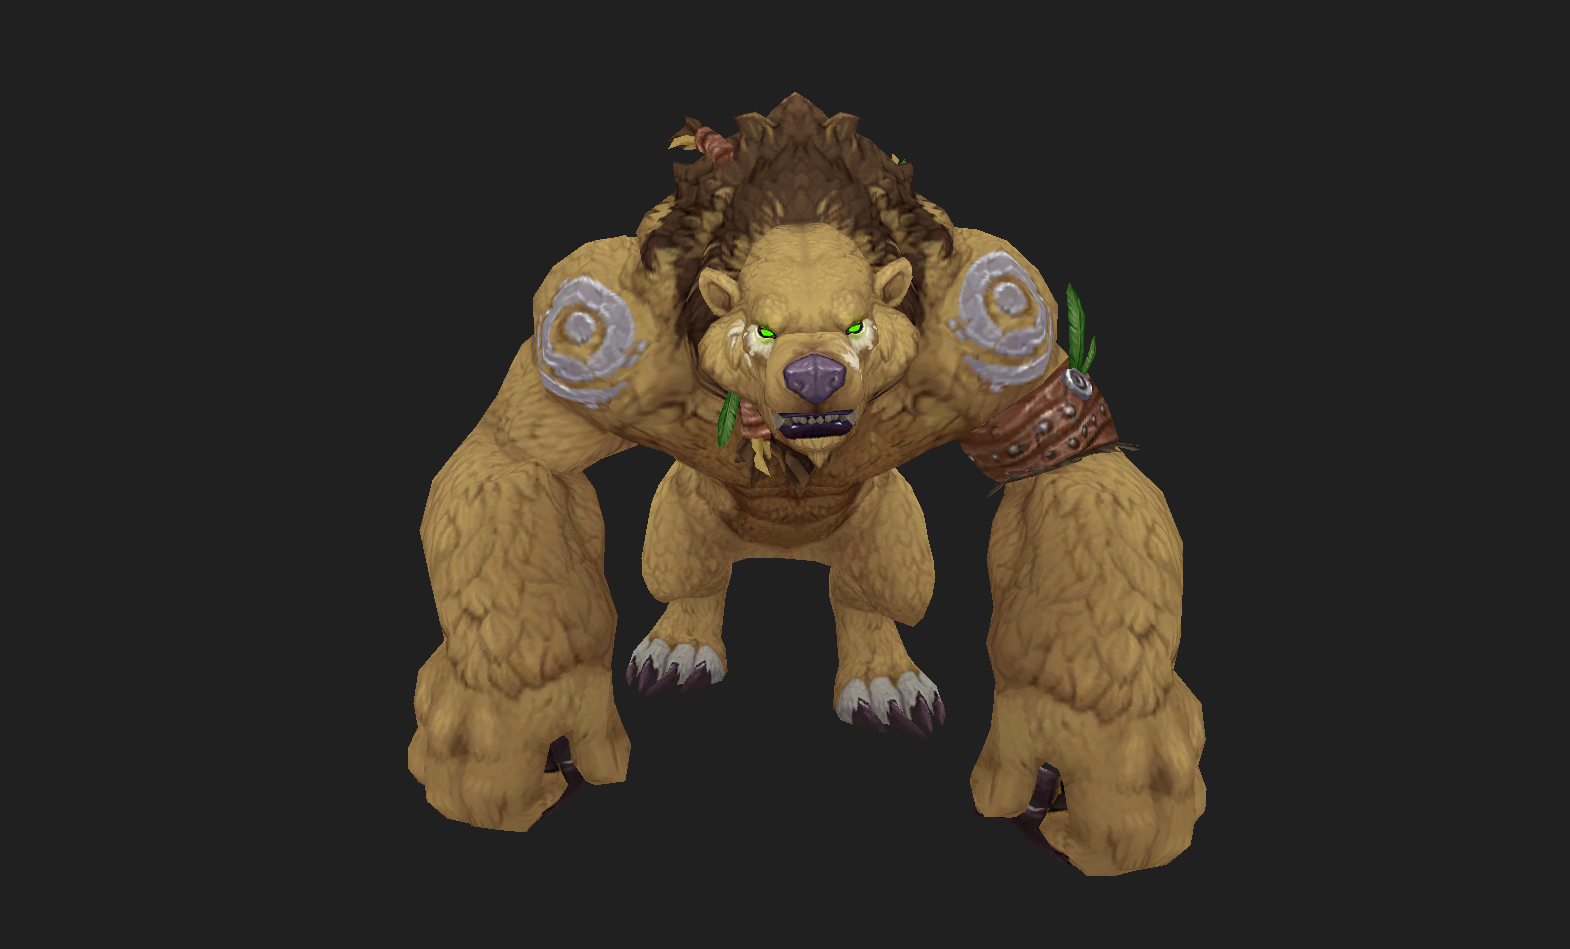 mage tower wow bear